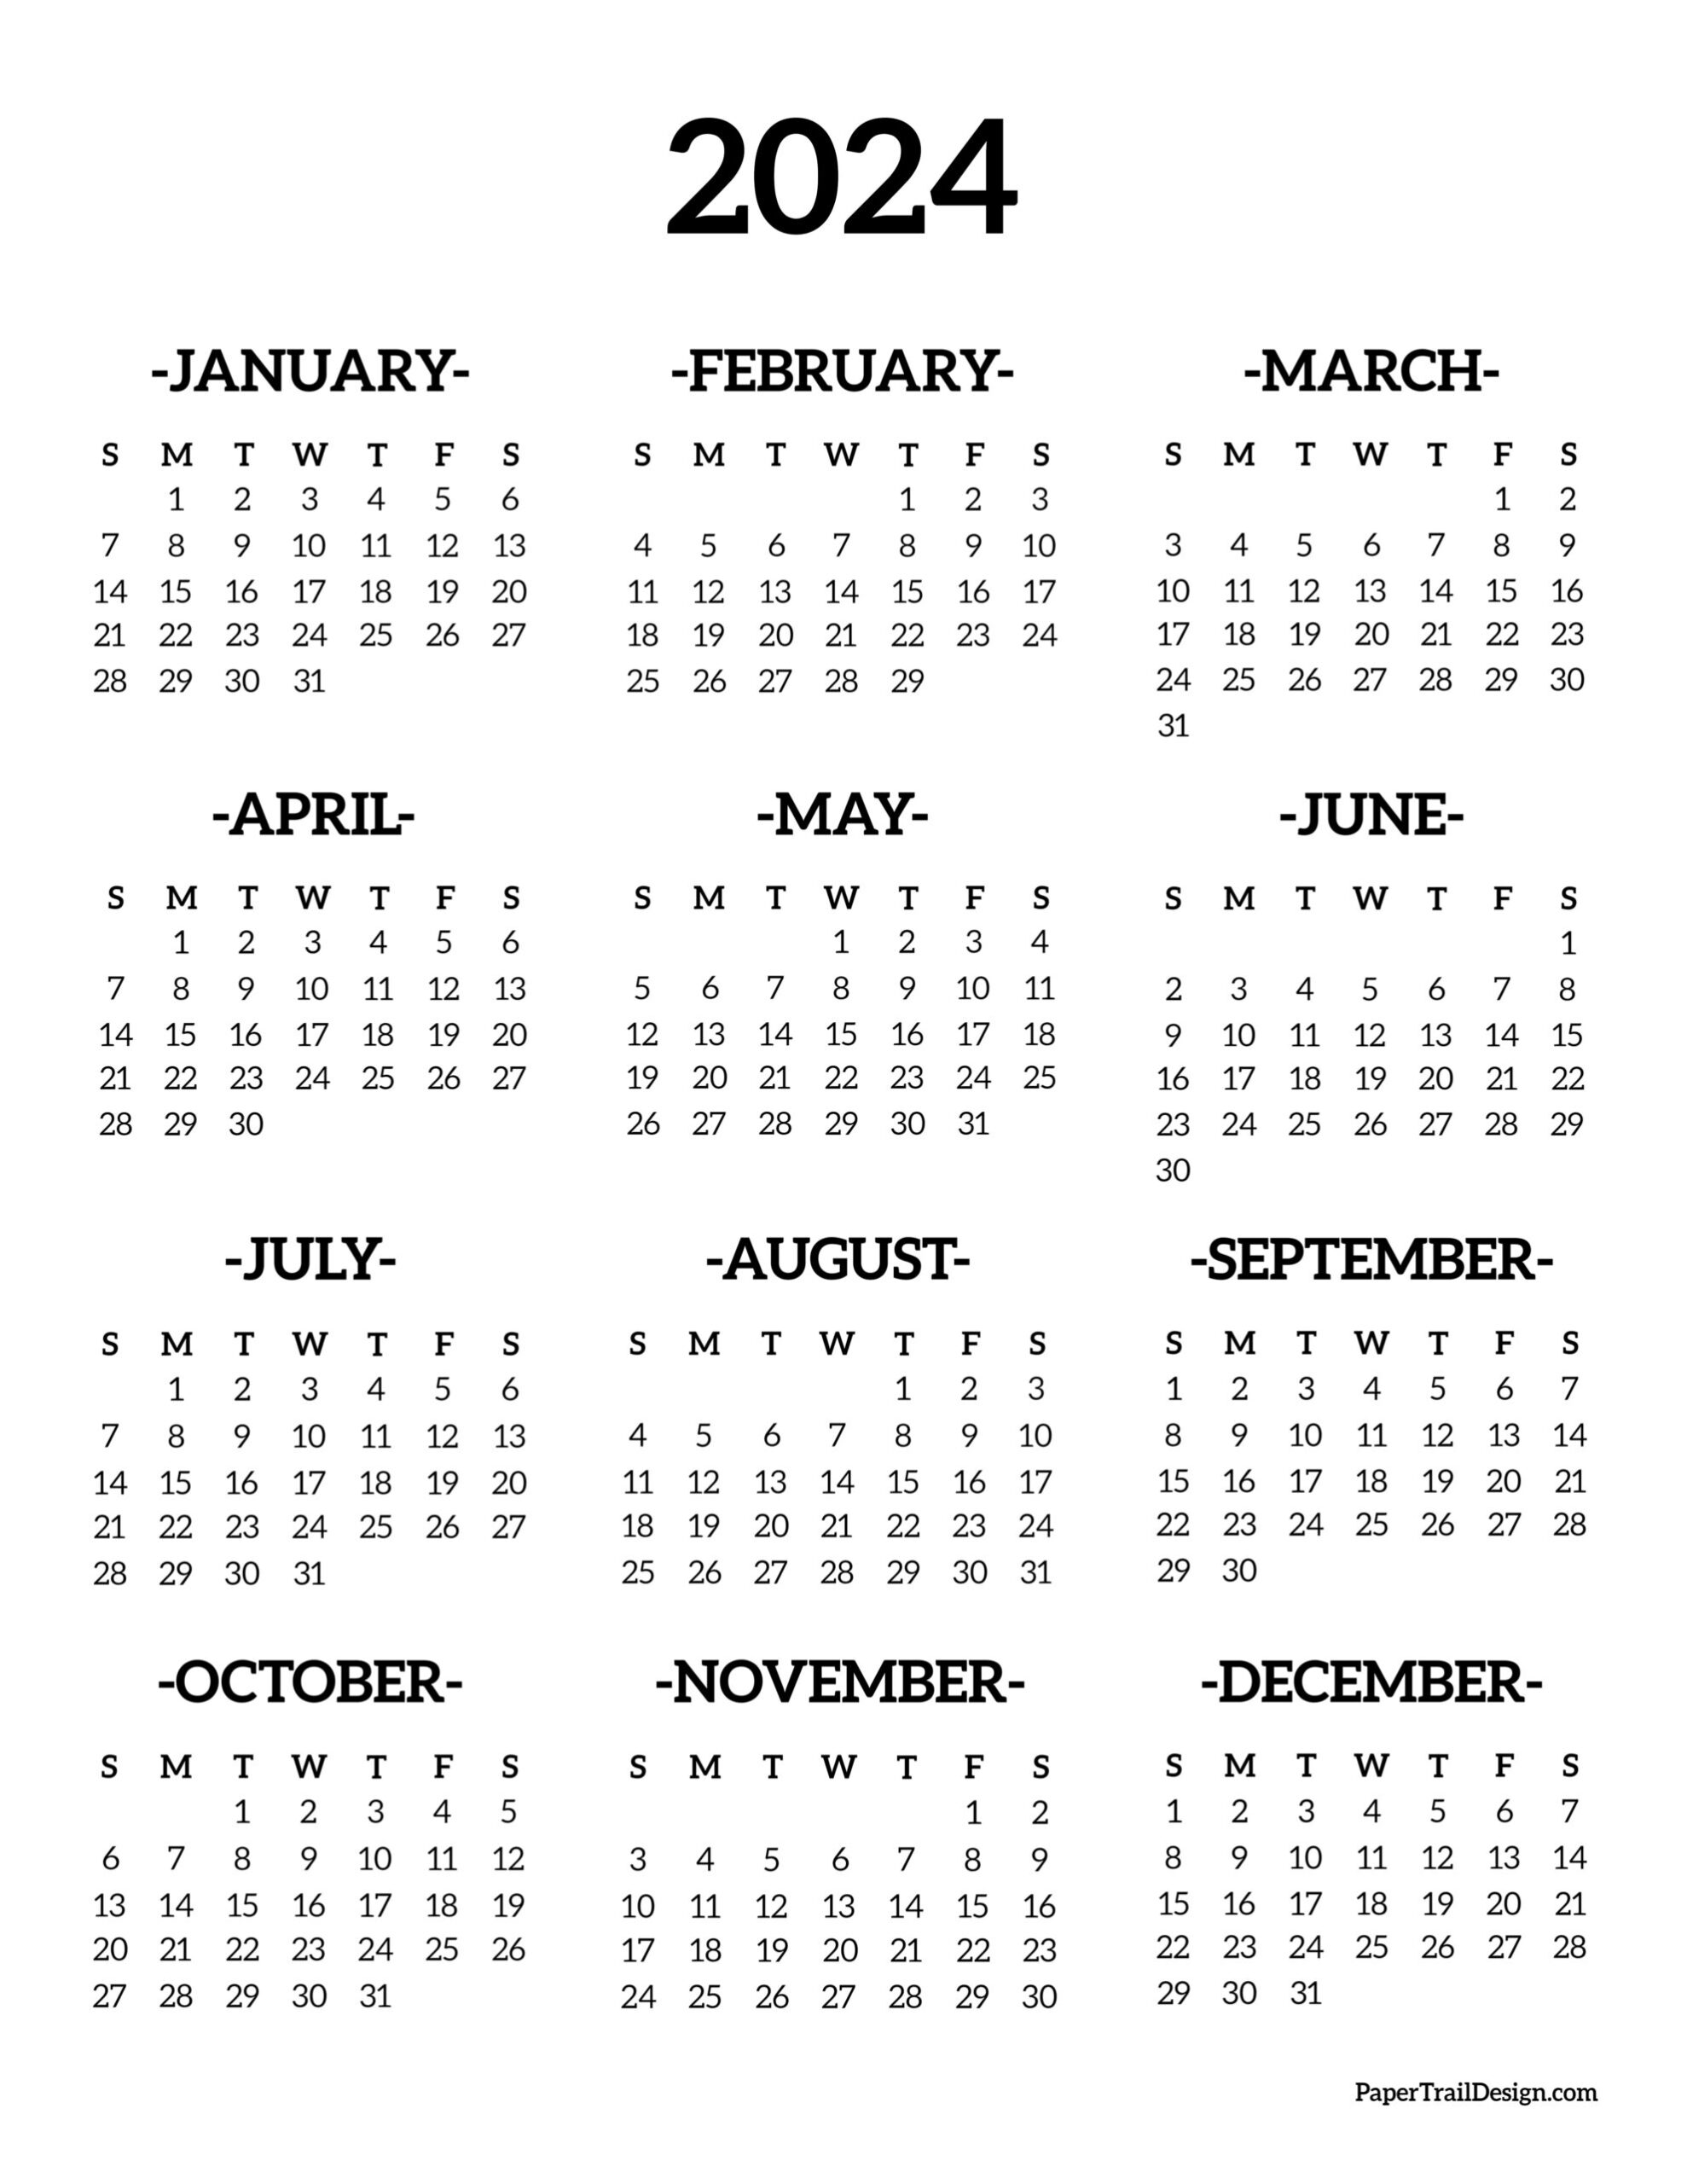 Calendar 2024 Printable One Page - Paper Trail Design for Free Year Calendar 2024 Printable